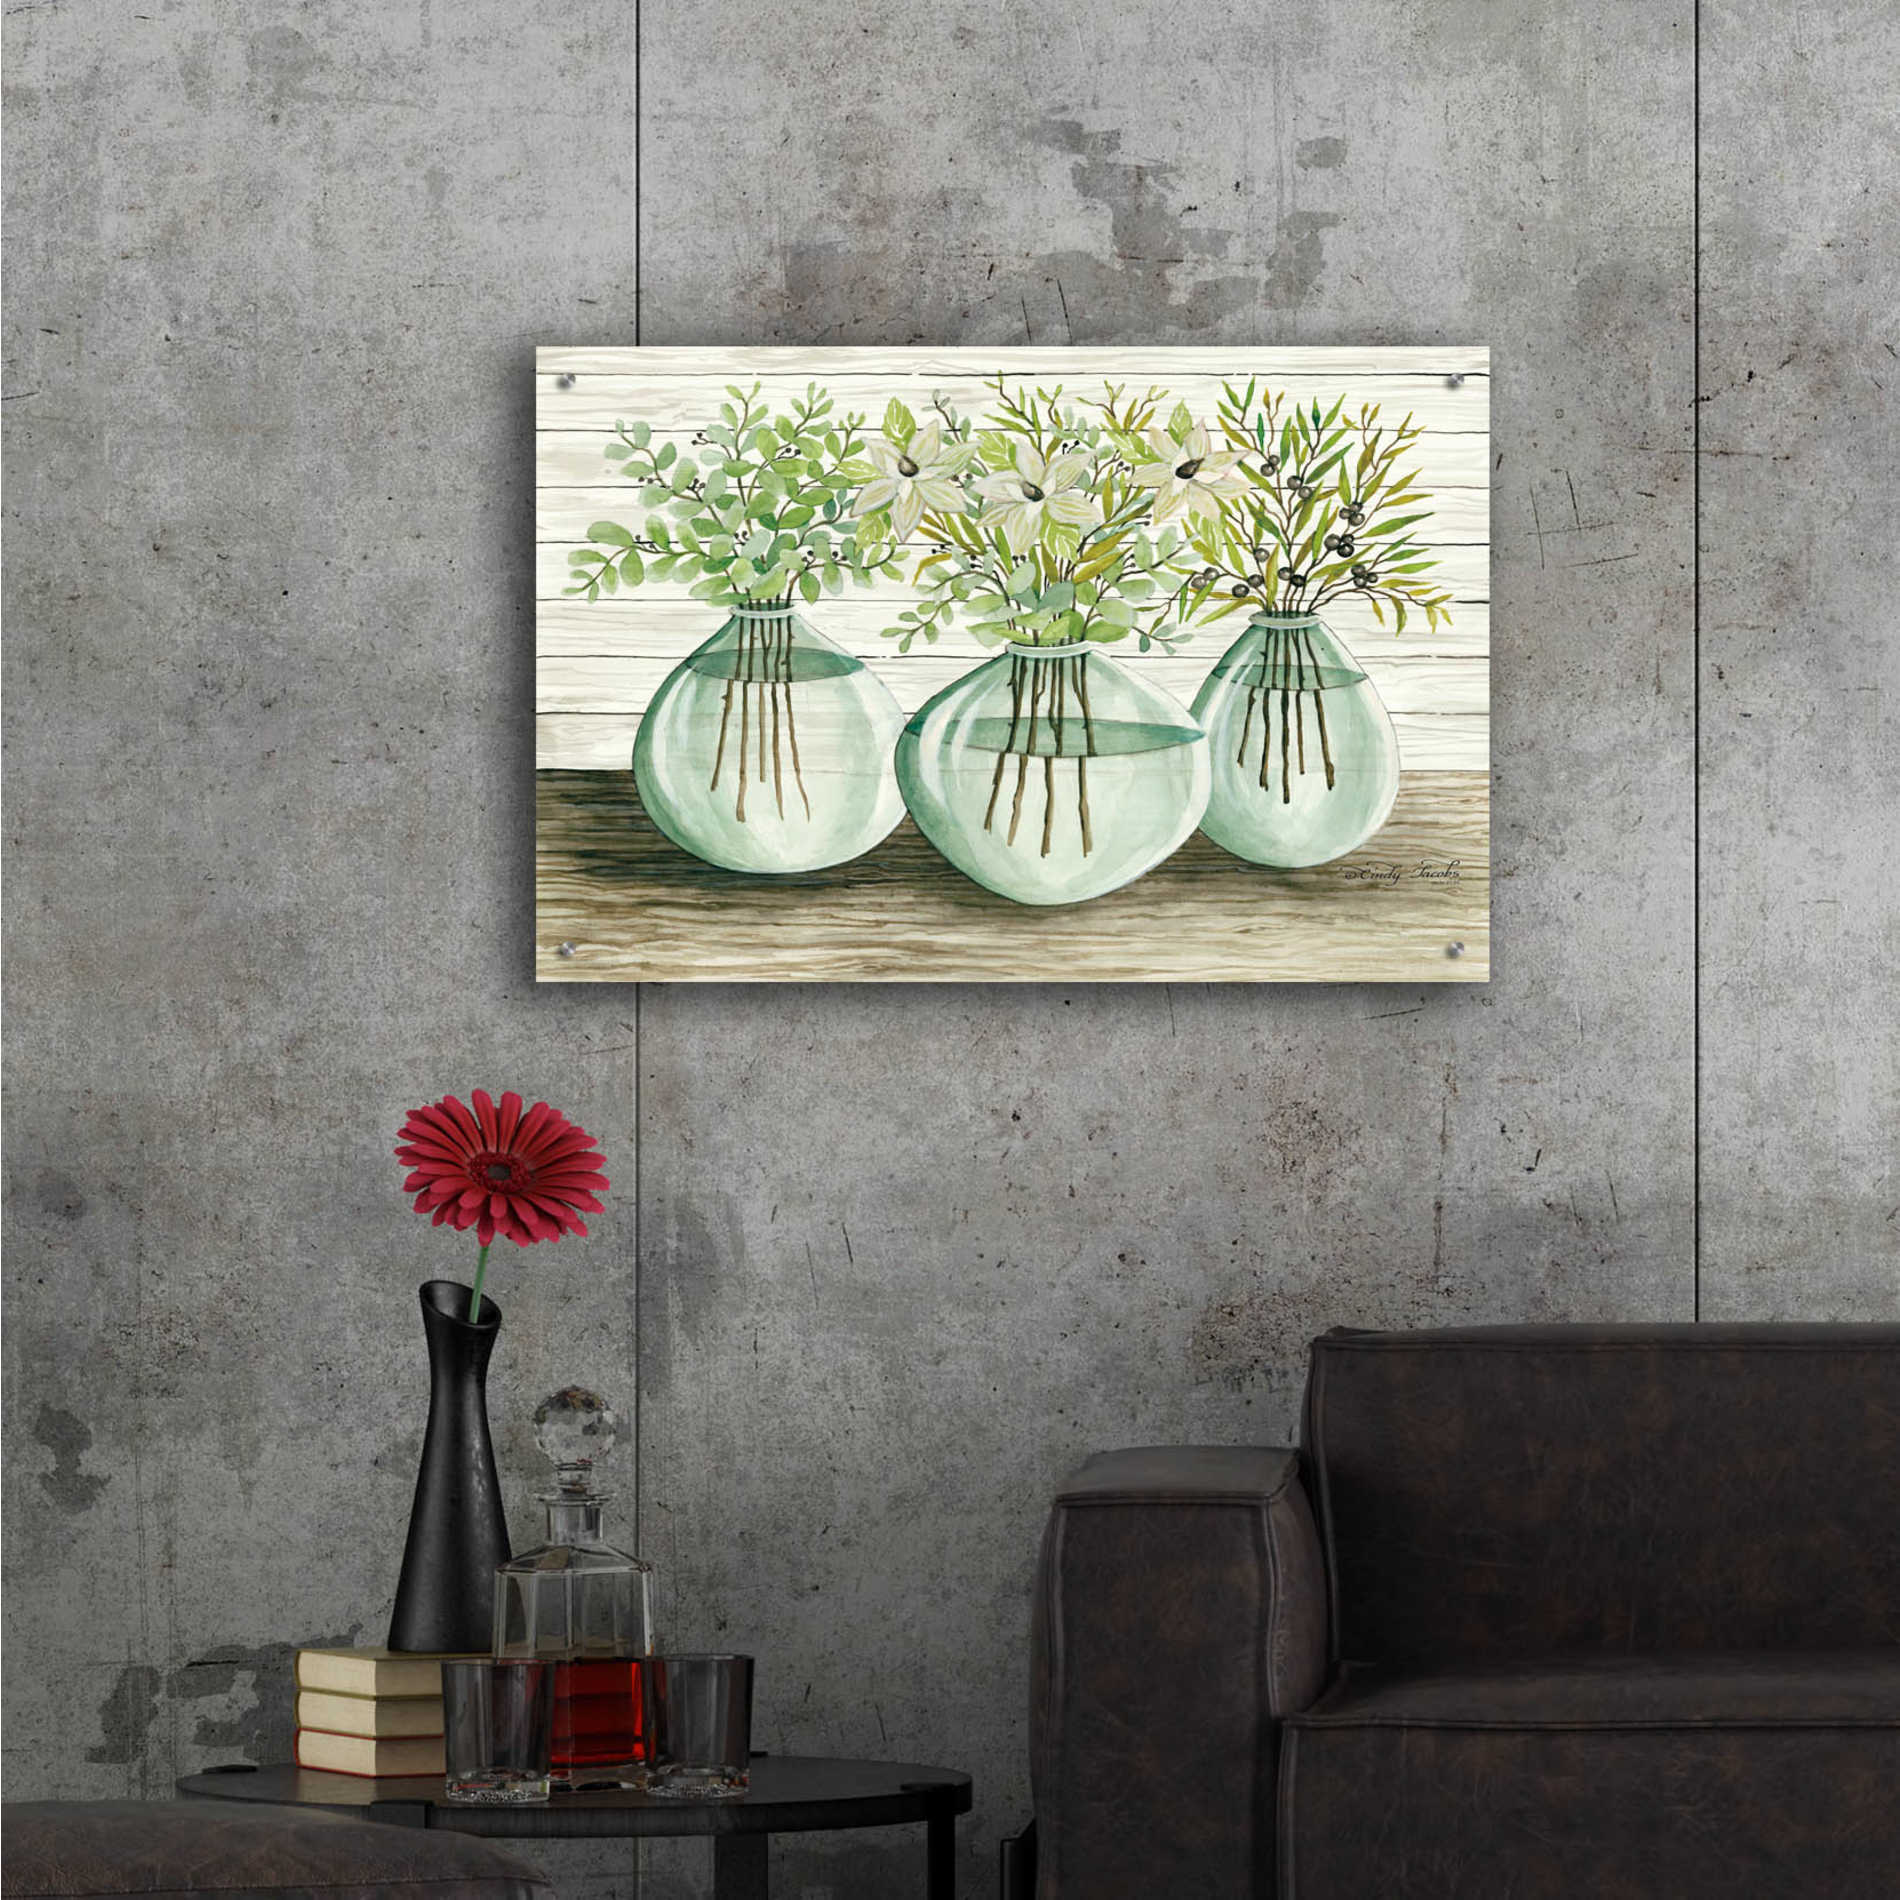 Epic Art 'Eucalyptus in Glass Vases' by Cindy Jacobs, Acrylic Glass Wall Art,36x24